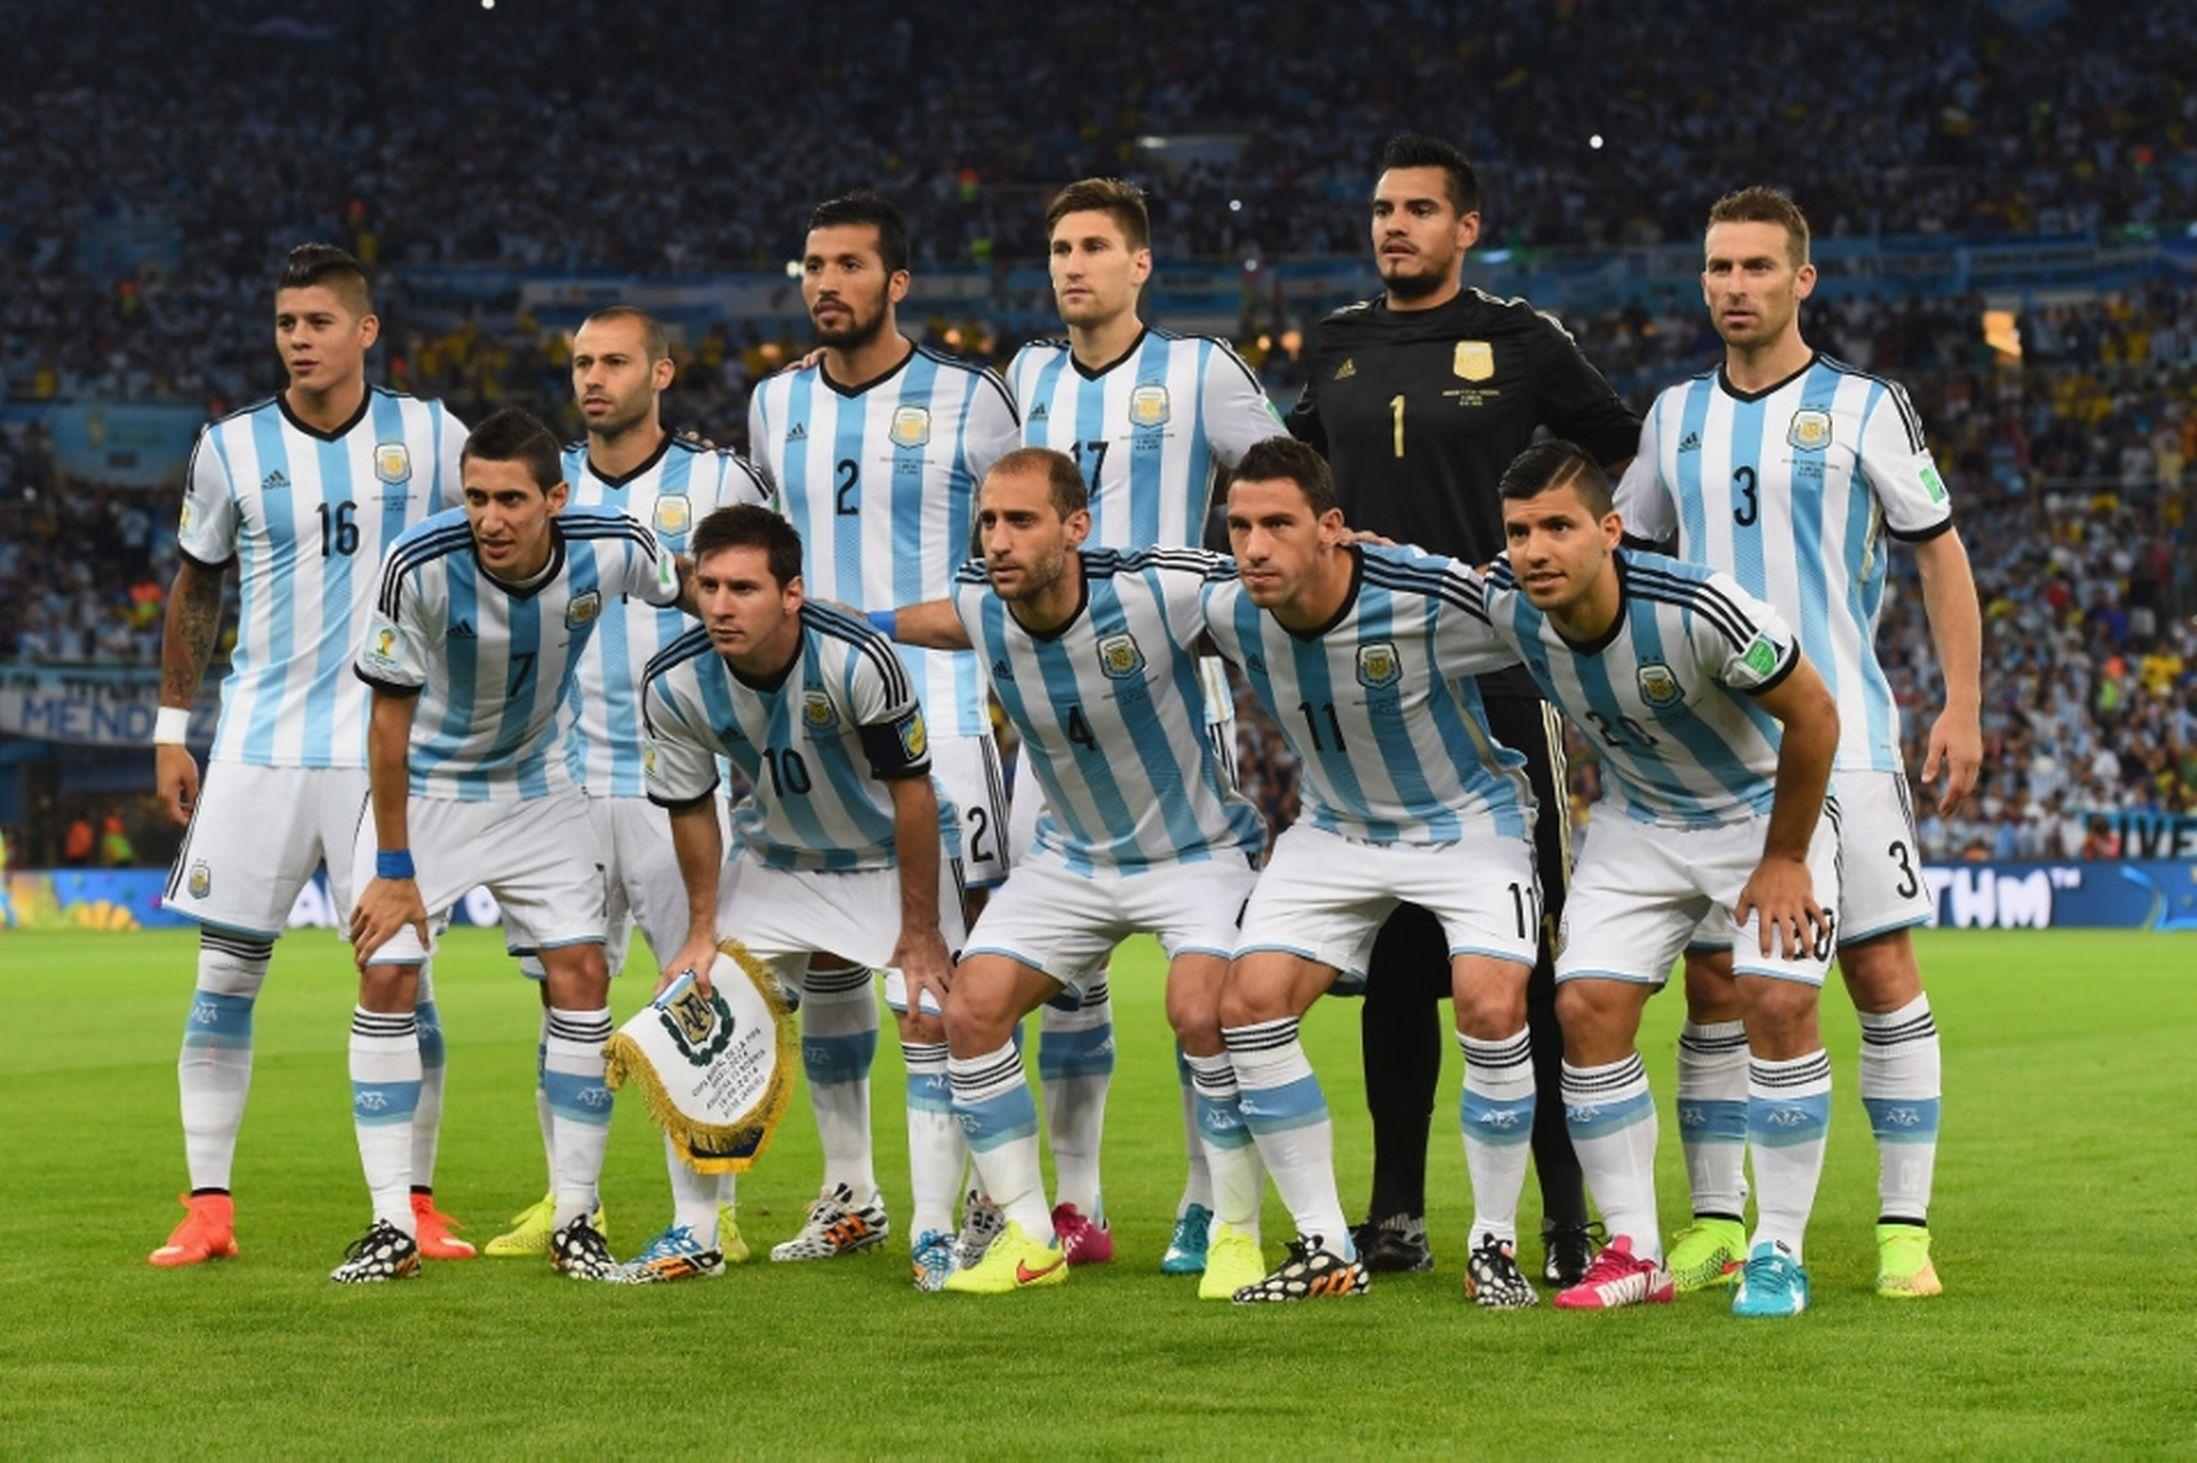 Argentina National Football Team Free HD Wallpaper Image Background